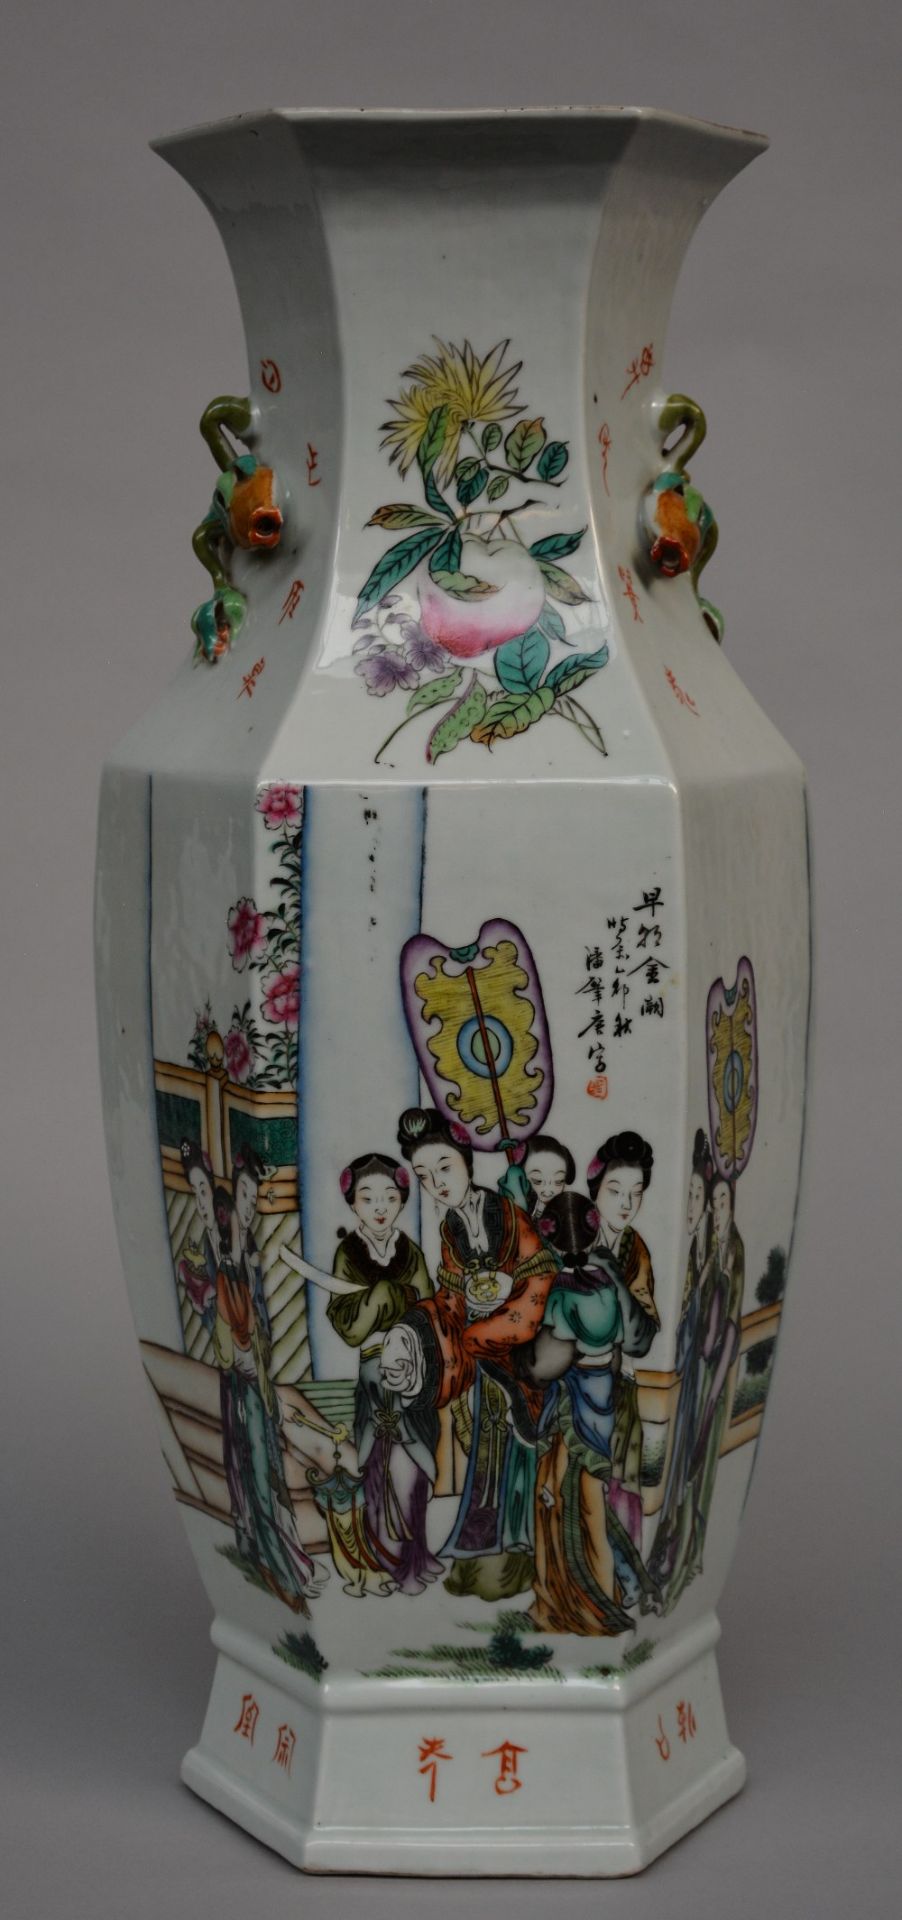 An exceptional Chinese hexagonal polychrome vase with relief decoration, signed by the artist Pan